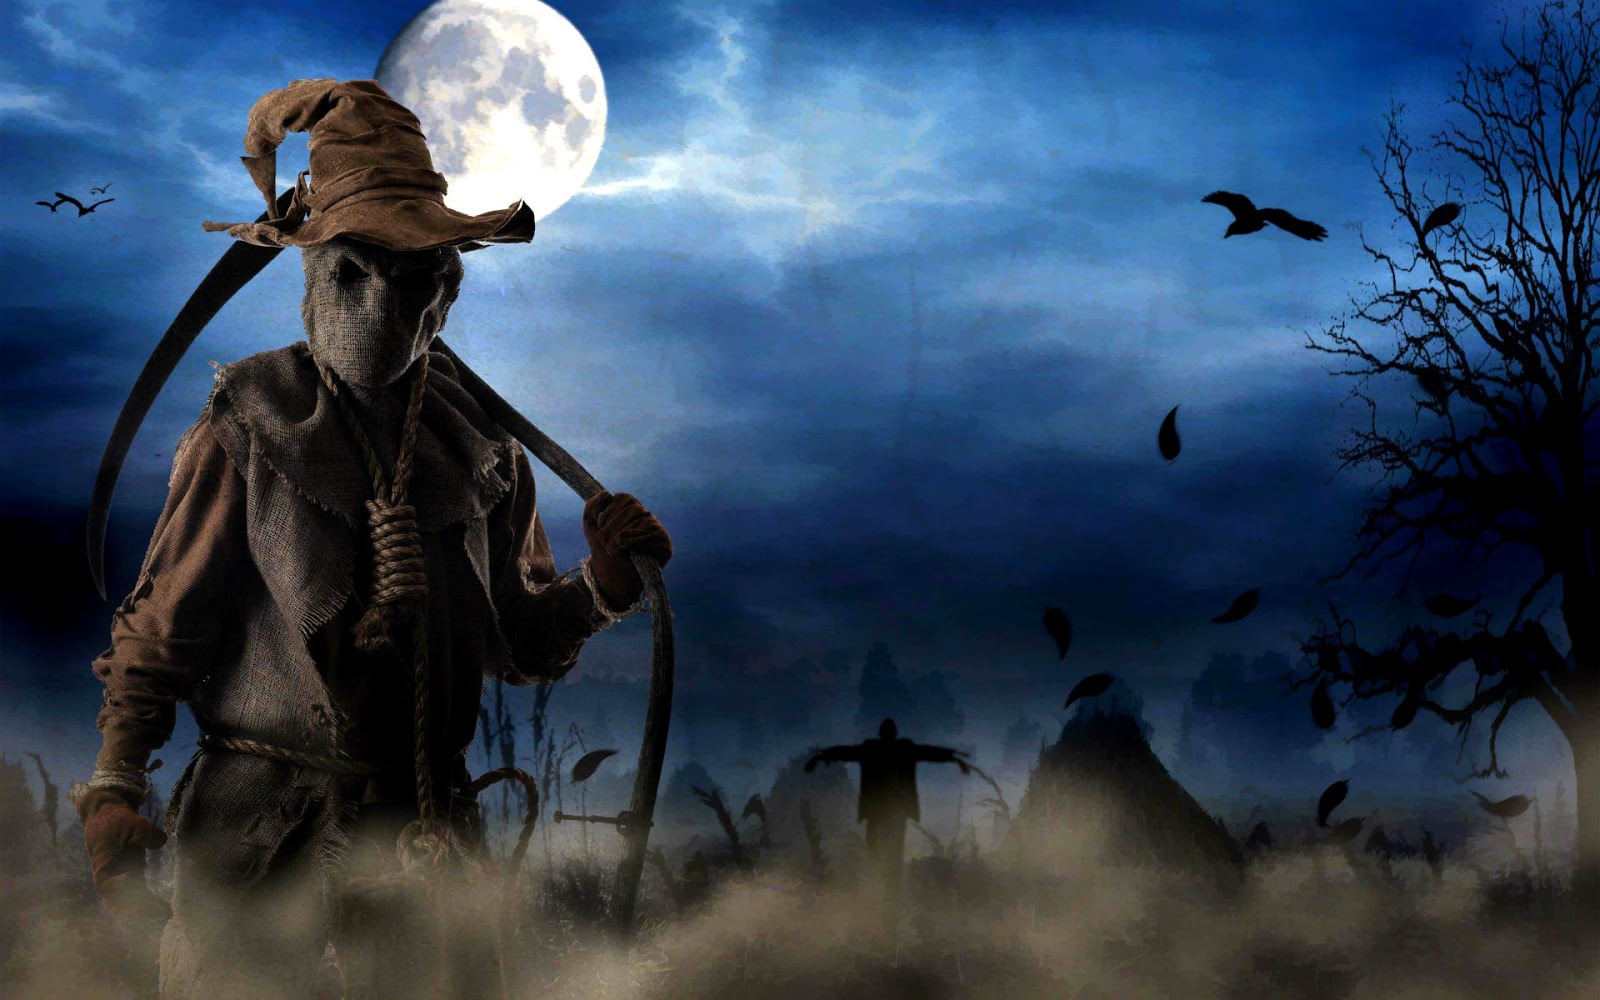 Festivals Horror Scary Spooky Image Pictures Wallpaper